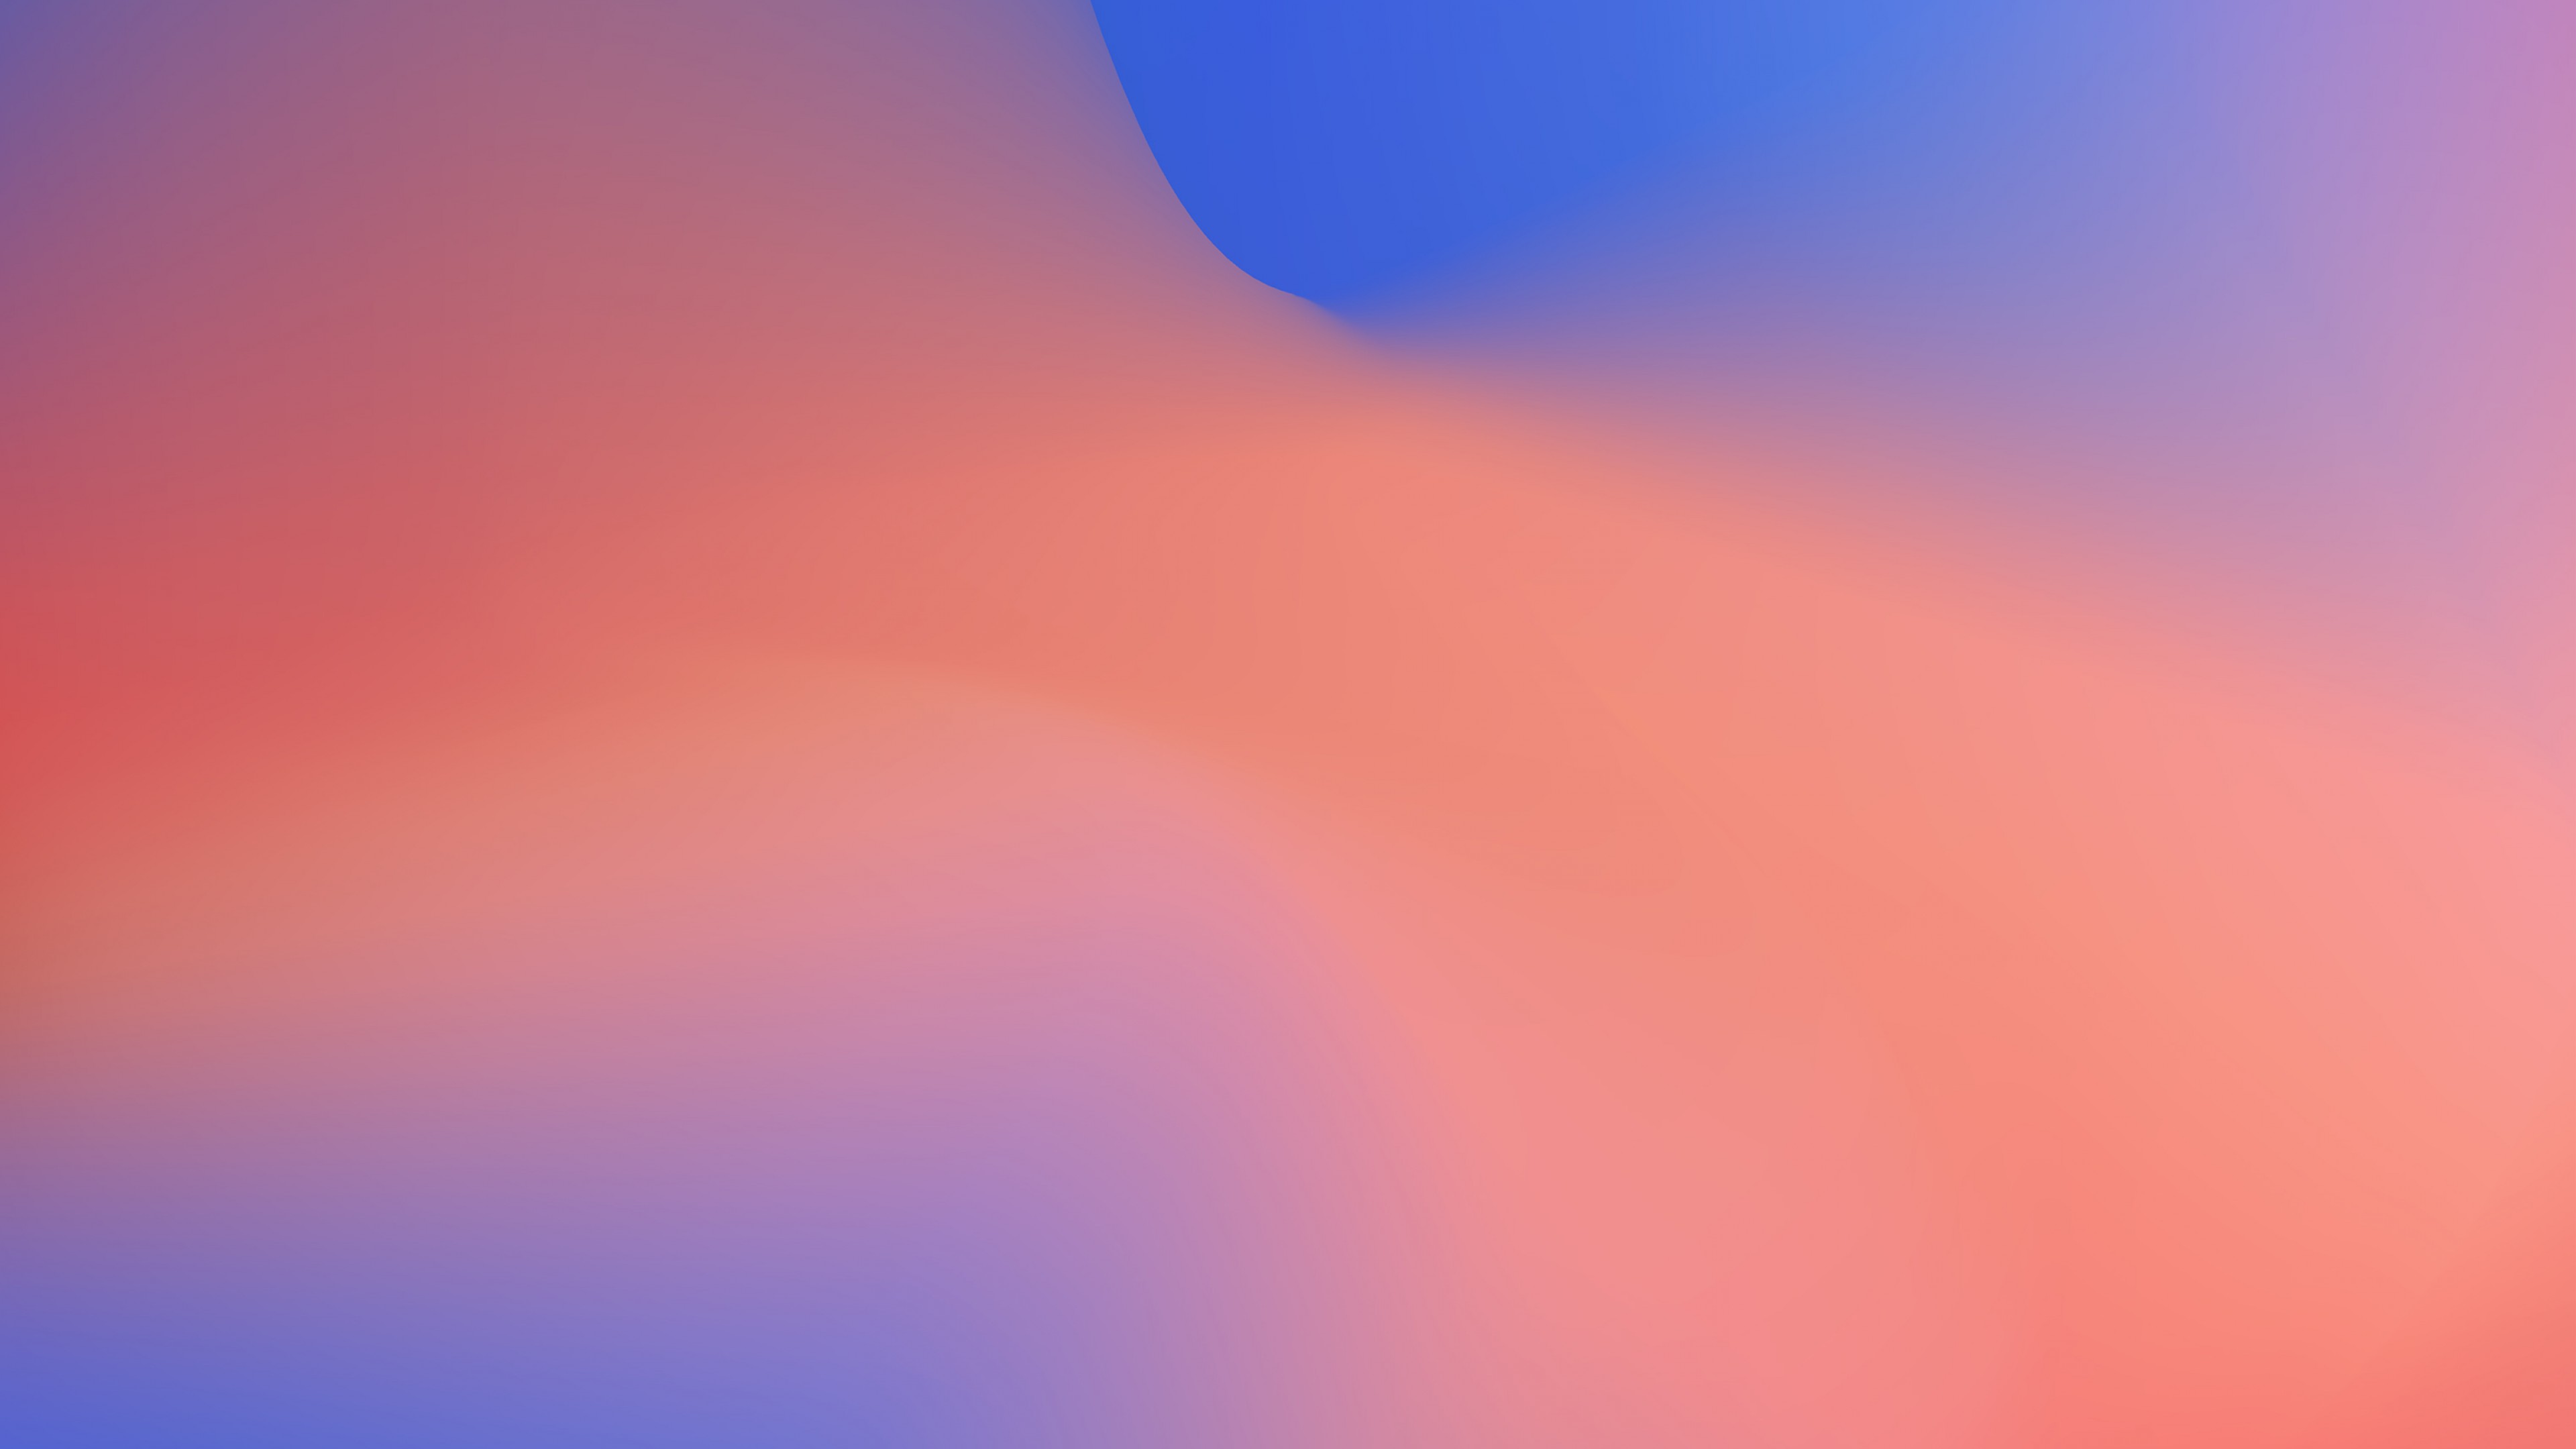 Wallpaper Google Pixel Android Pie Abstract 4k Os